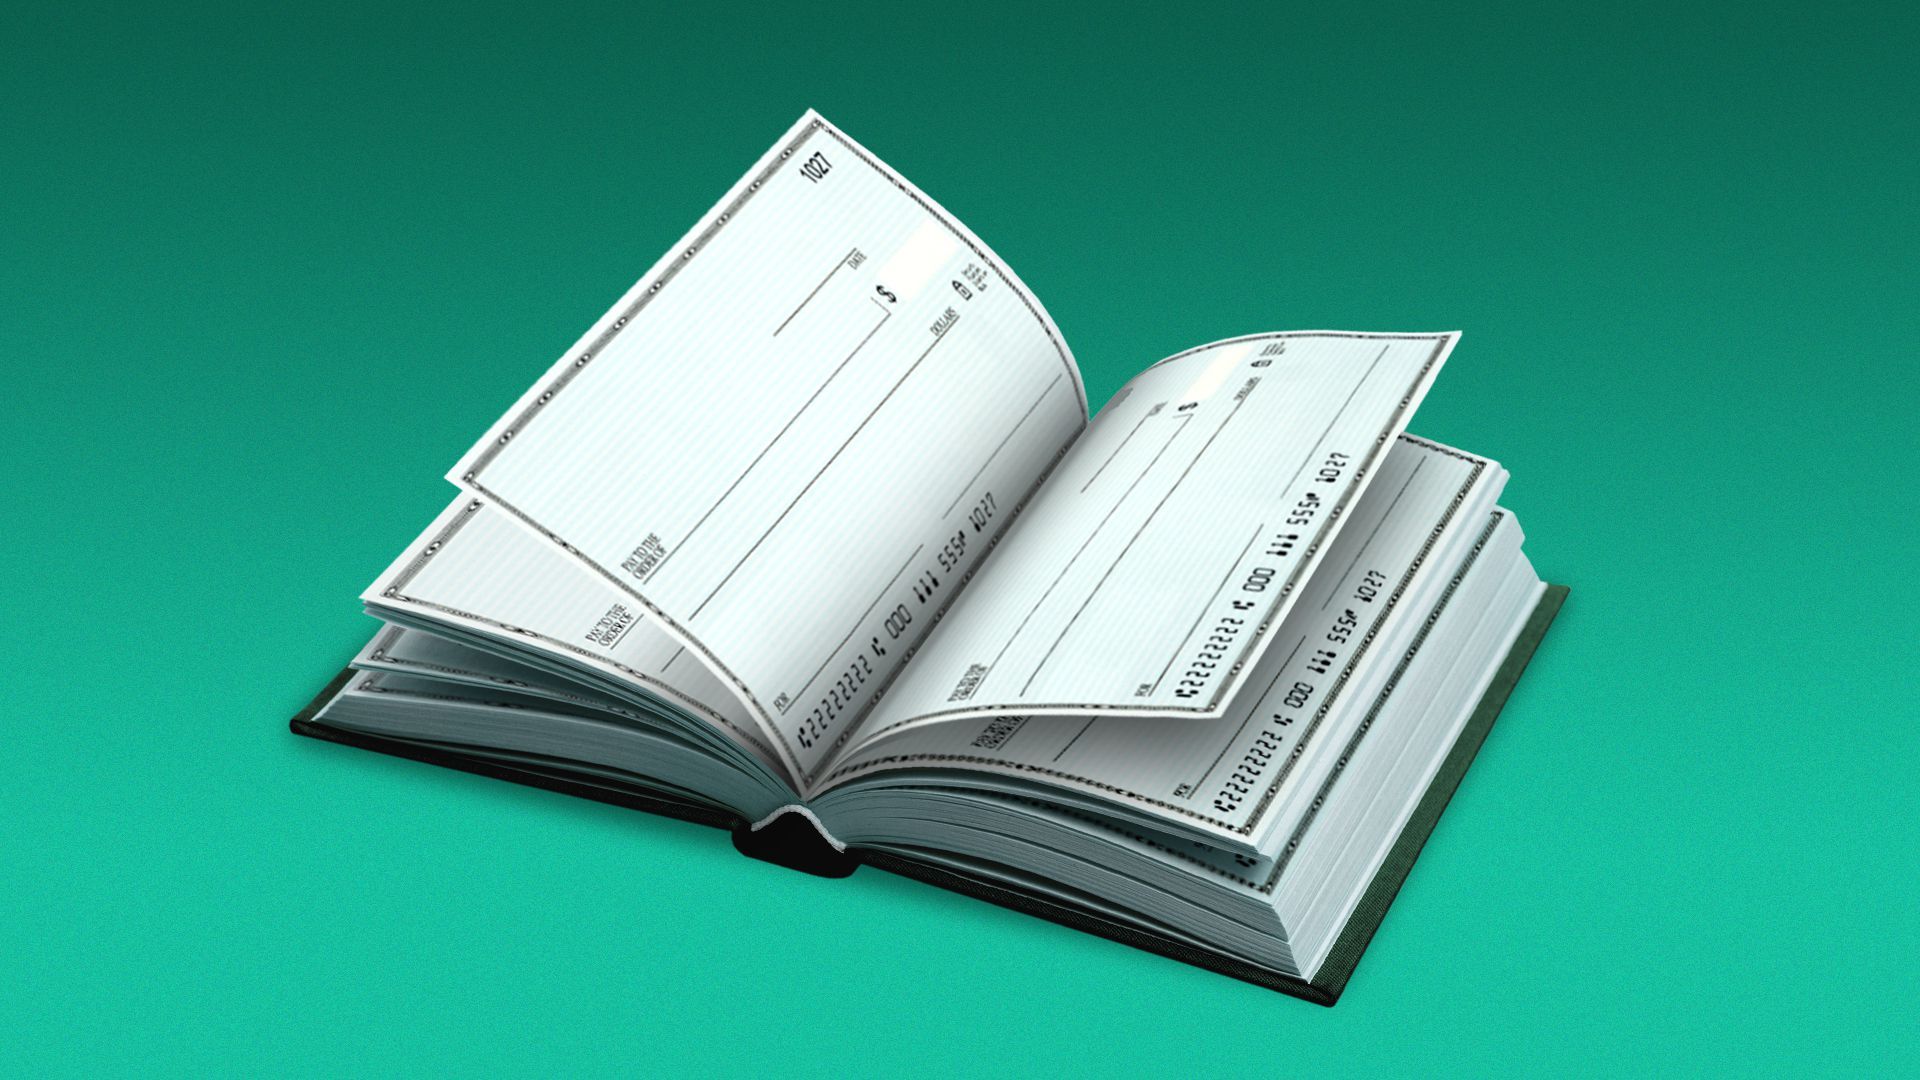 Illustration of a hardcover book opened with pages made from personal checks